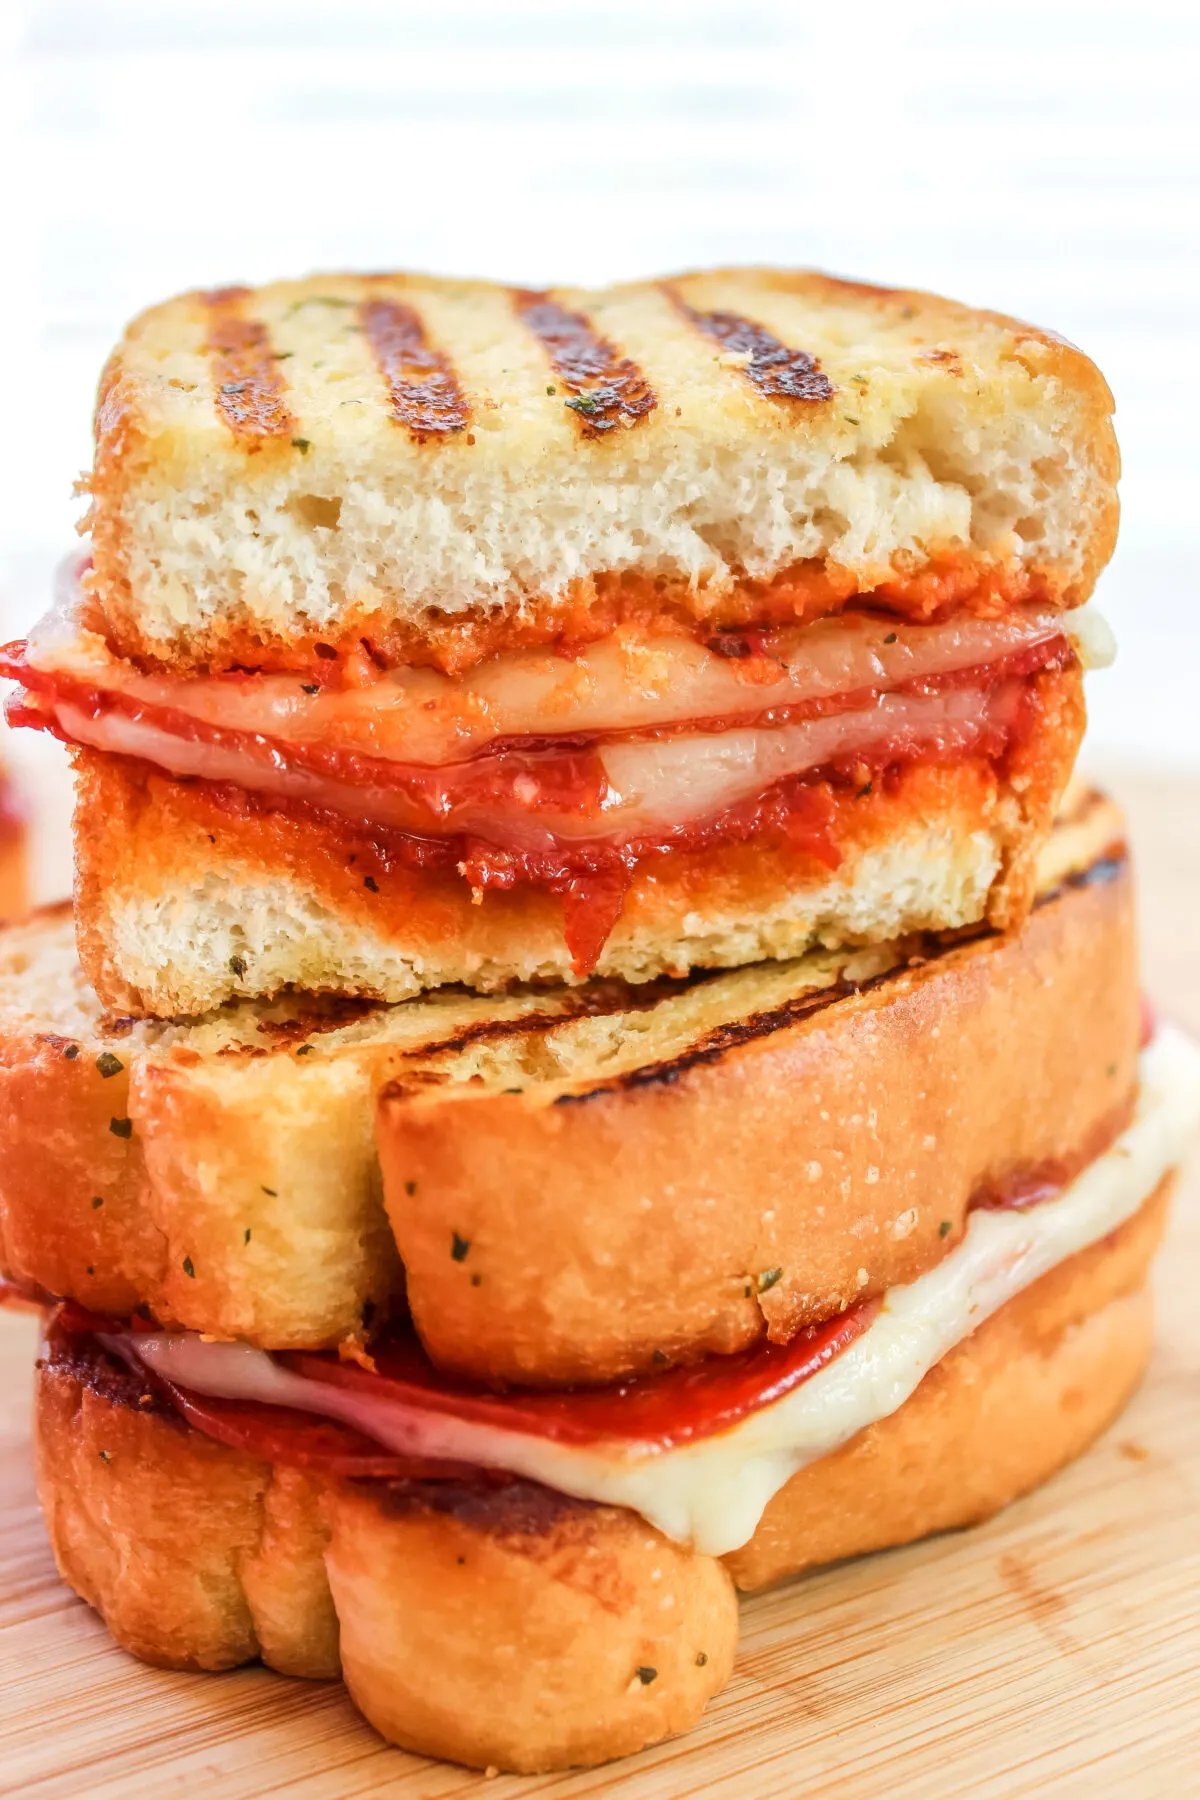 This Grilled Pepperoni Pizza Sandwich is a fun way to eat an old favourite! This easy to make recipe is a tasty spin on a grilled cheese.